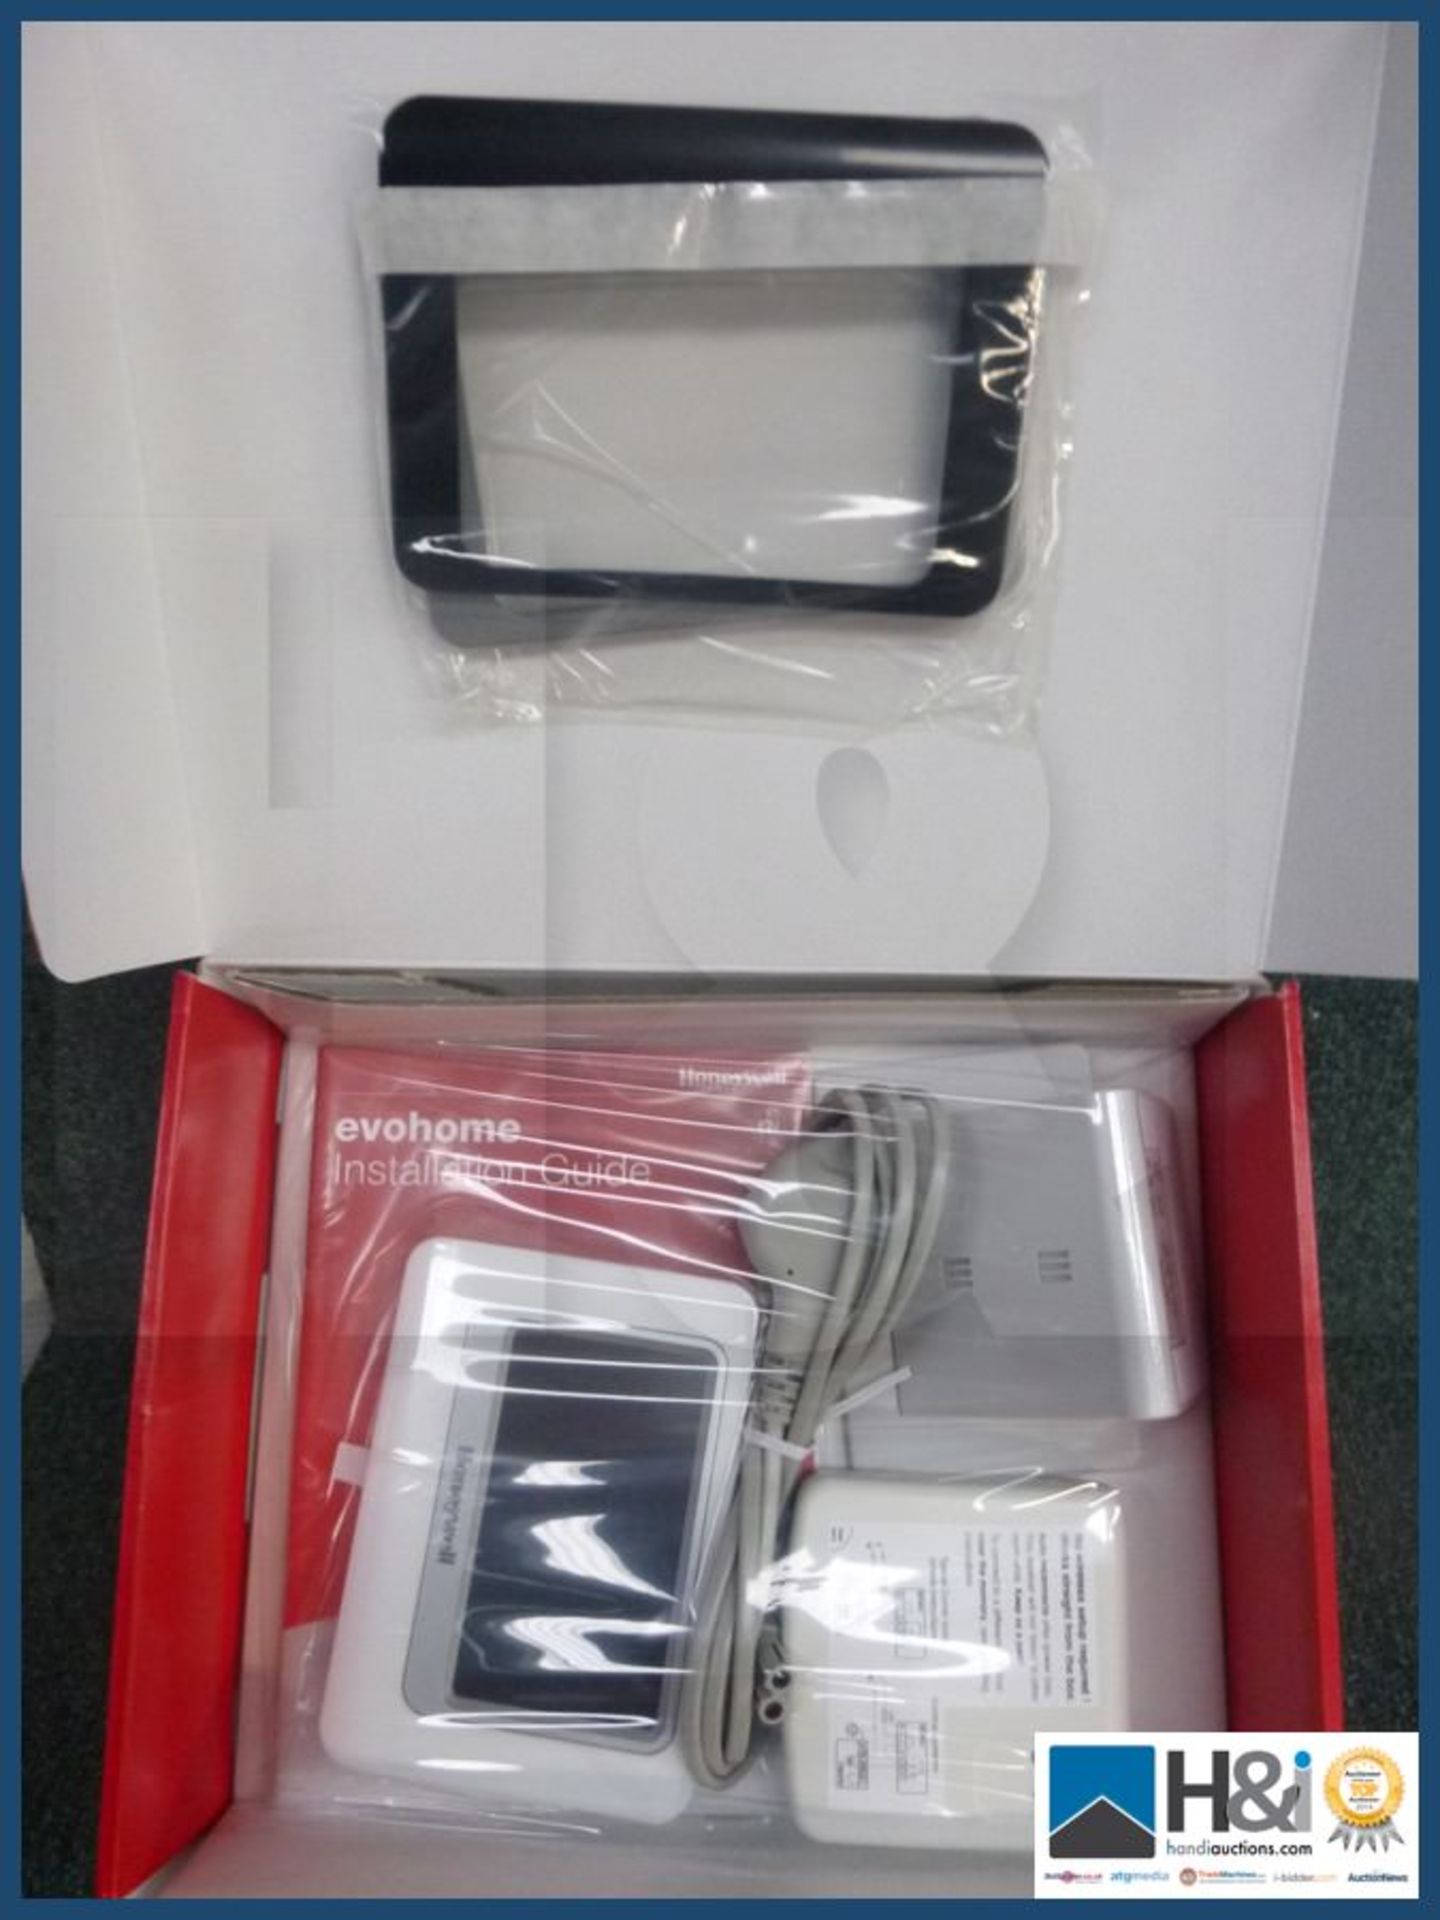 Honeywell evohome Base Pack Contains central controller and wireless relay box.RRP 70 GBP. - Image 2 of 2